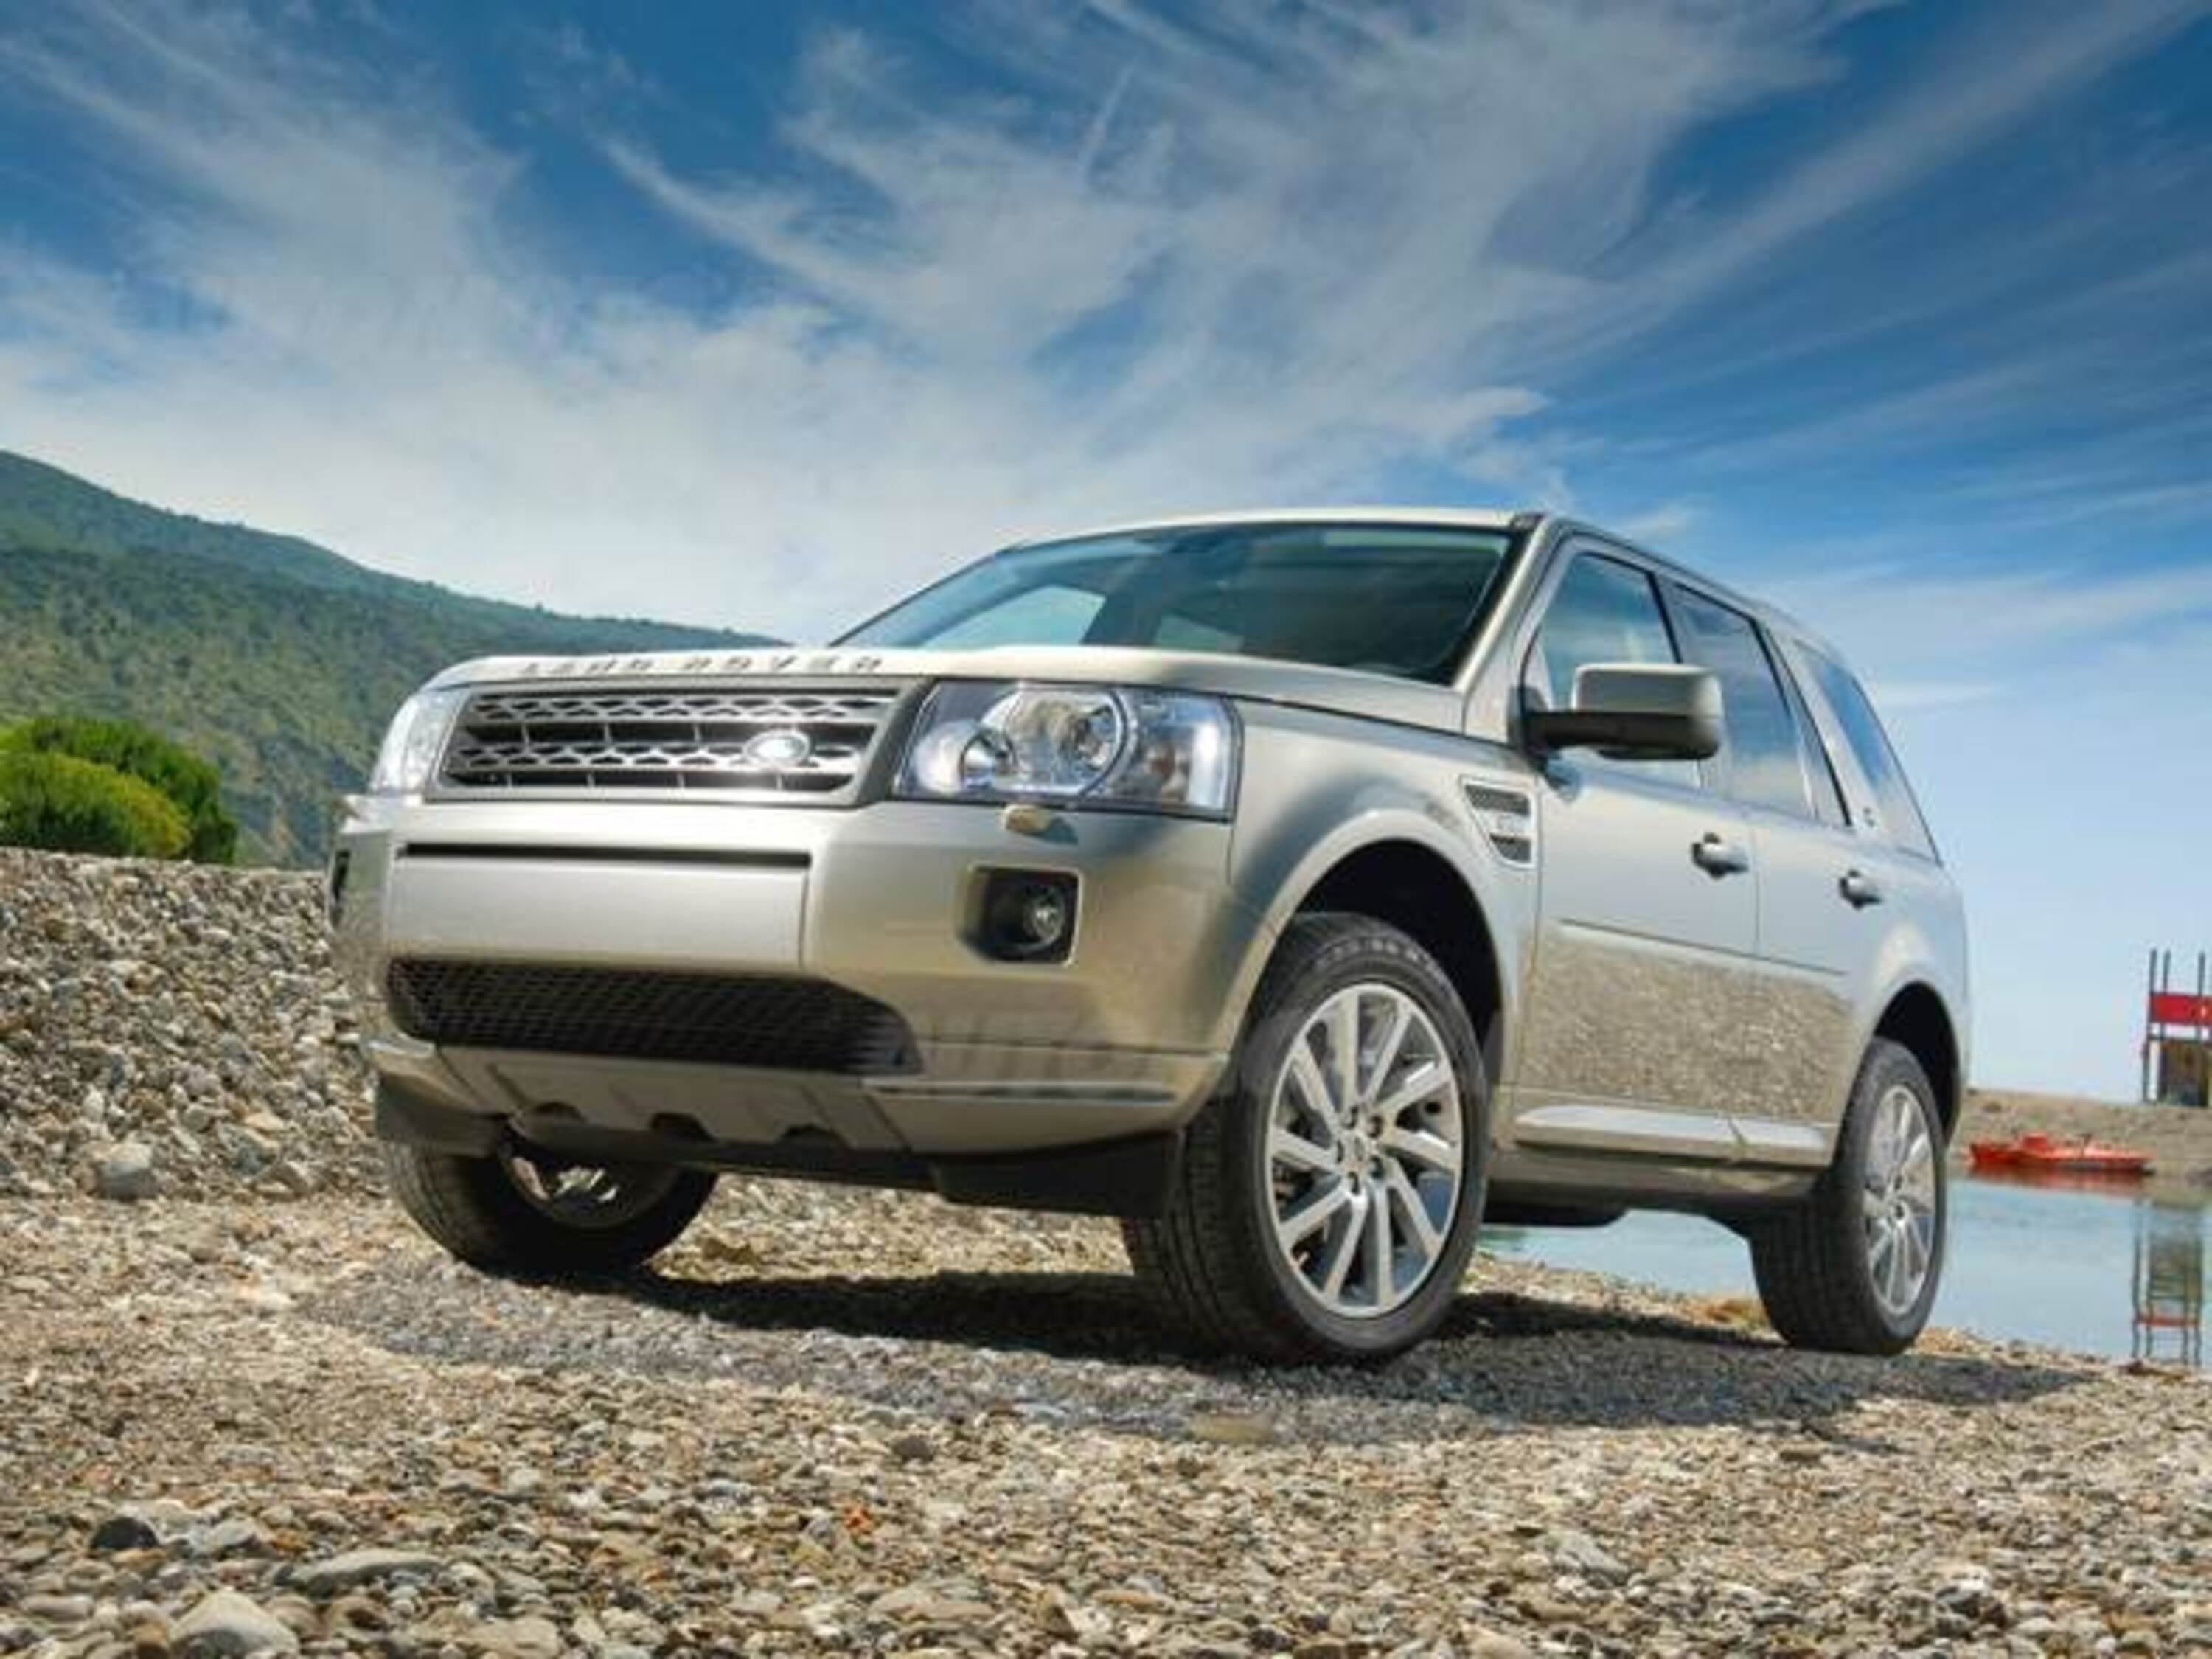 Land Rover Freelander 2.2 SD4 S.W. Limited Edition